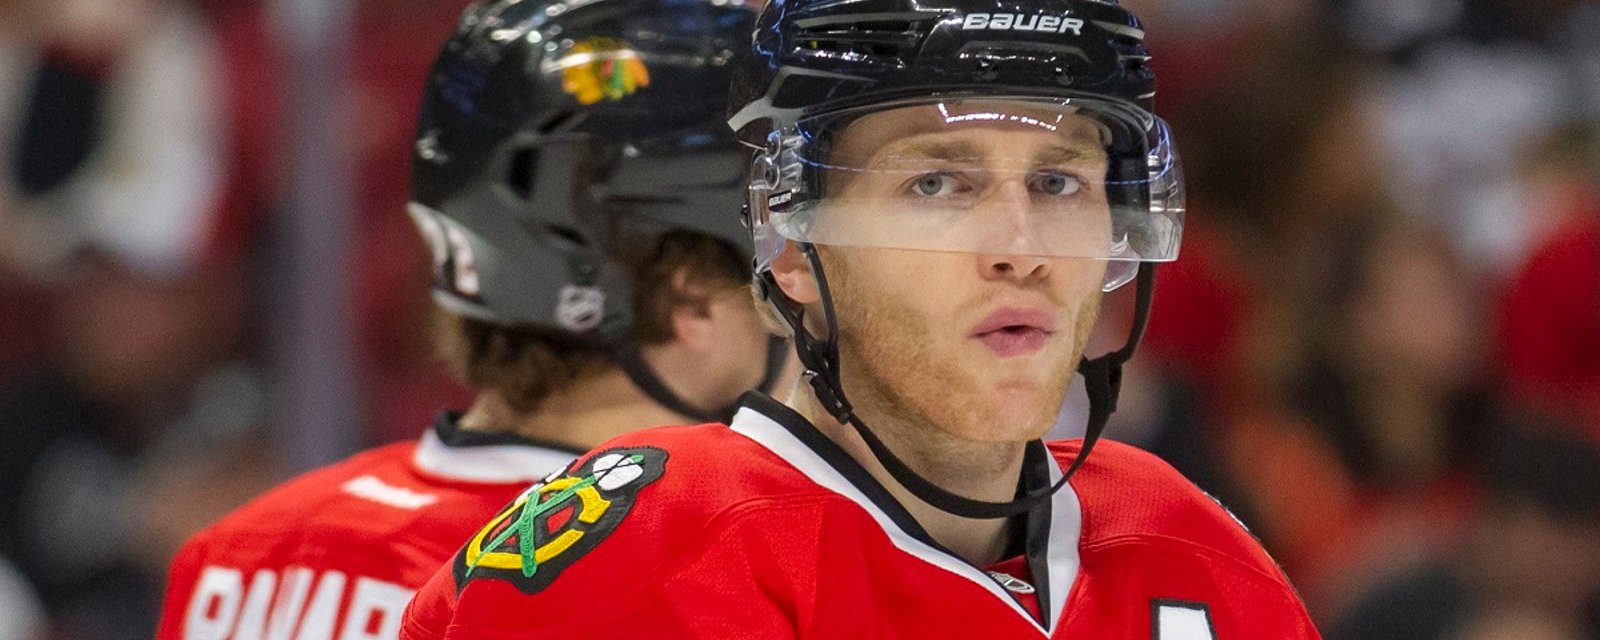 Mother sends Patrick Kane a wonderful message after he shows kindness to her son.